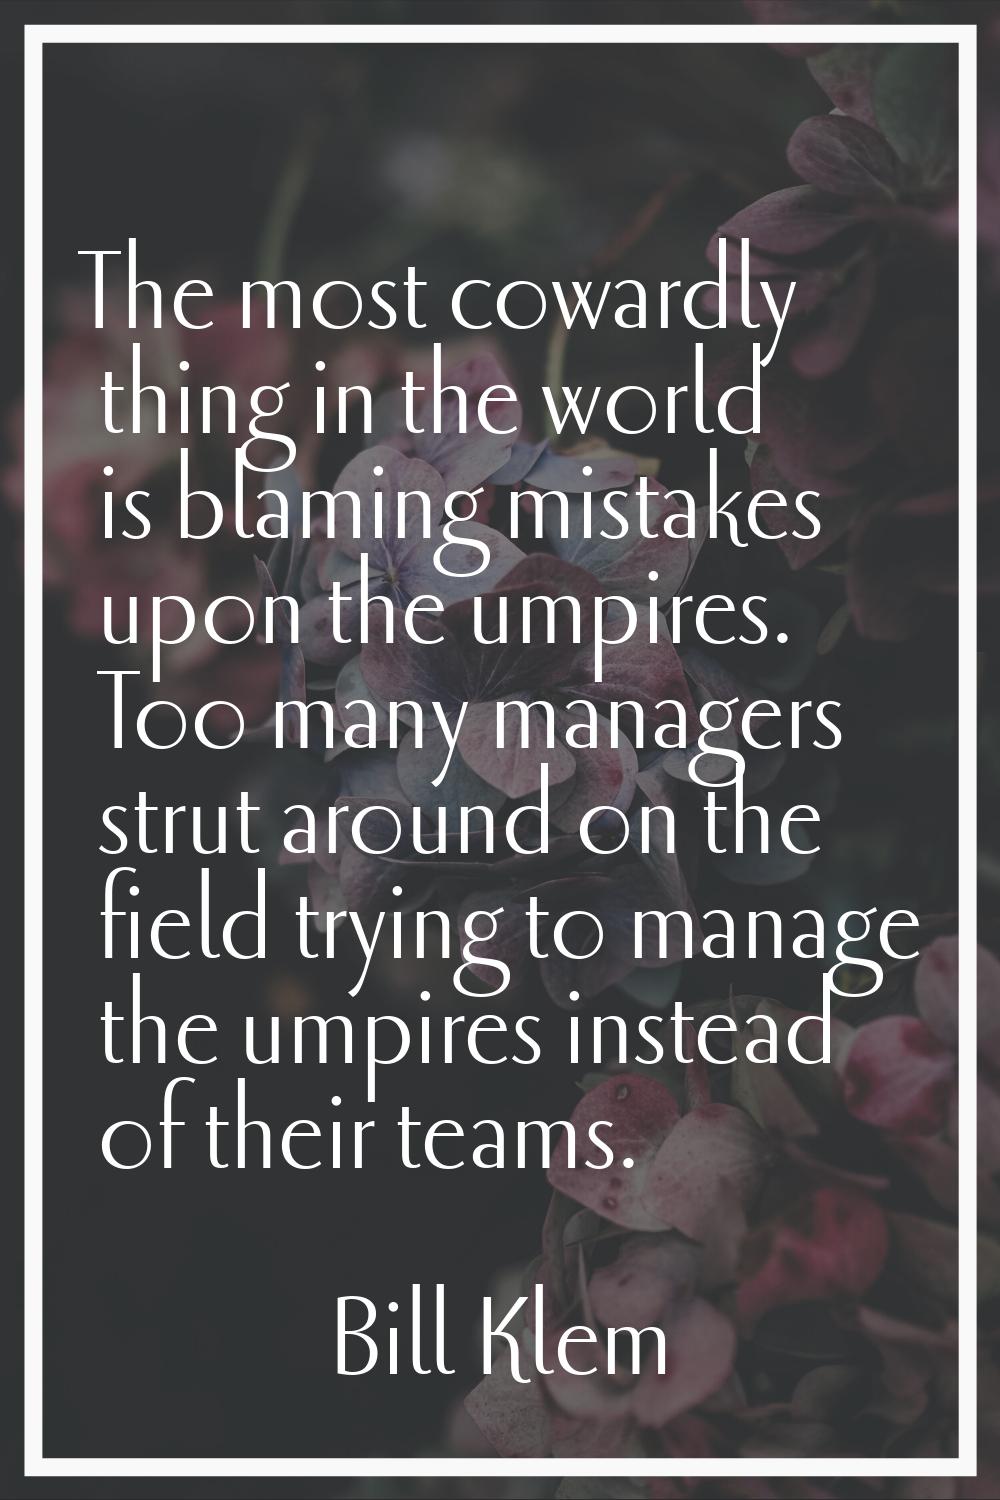 The most cowardly thing in the world is blaming mistakes upon the umpires. Too many managers strut 